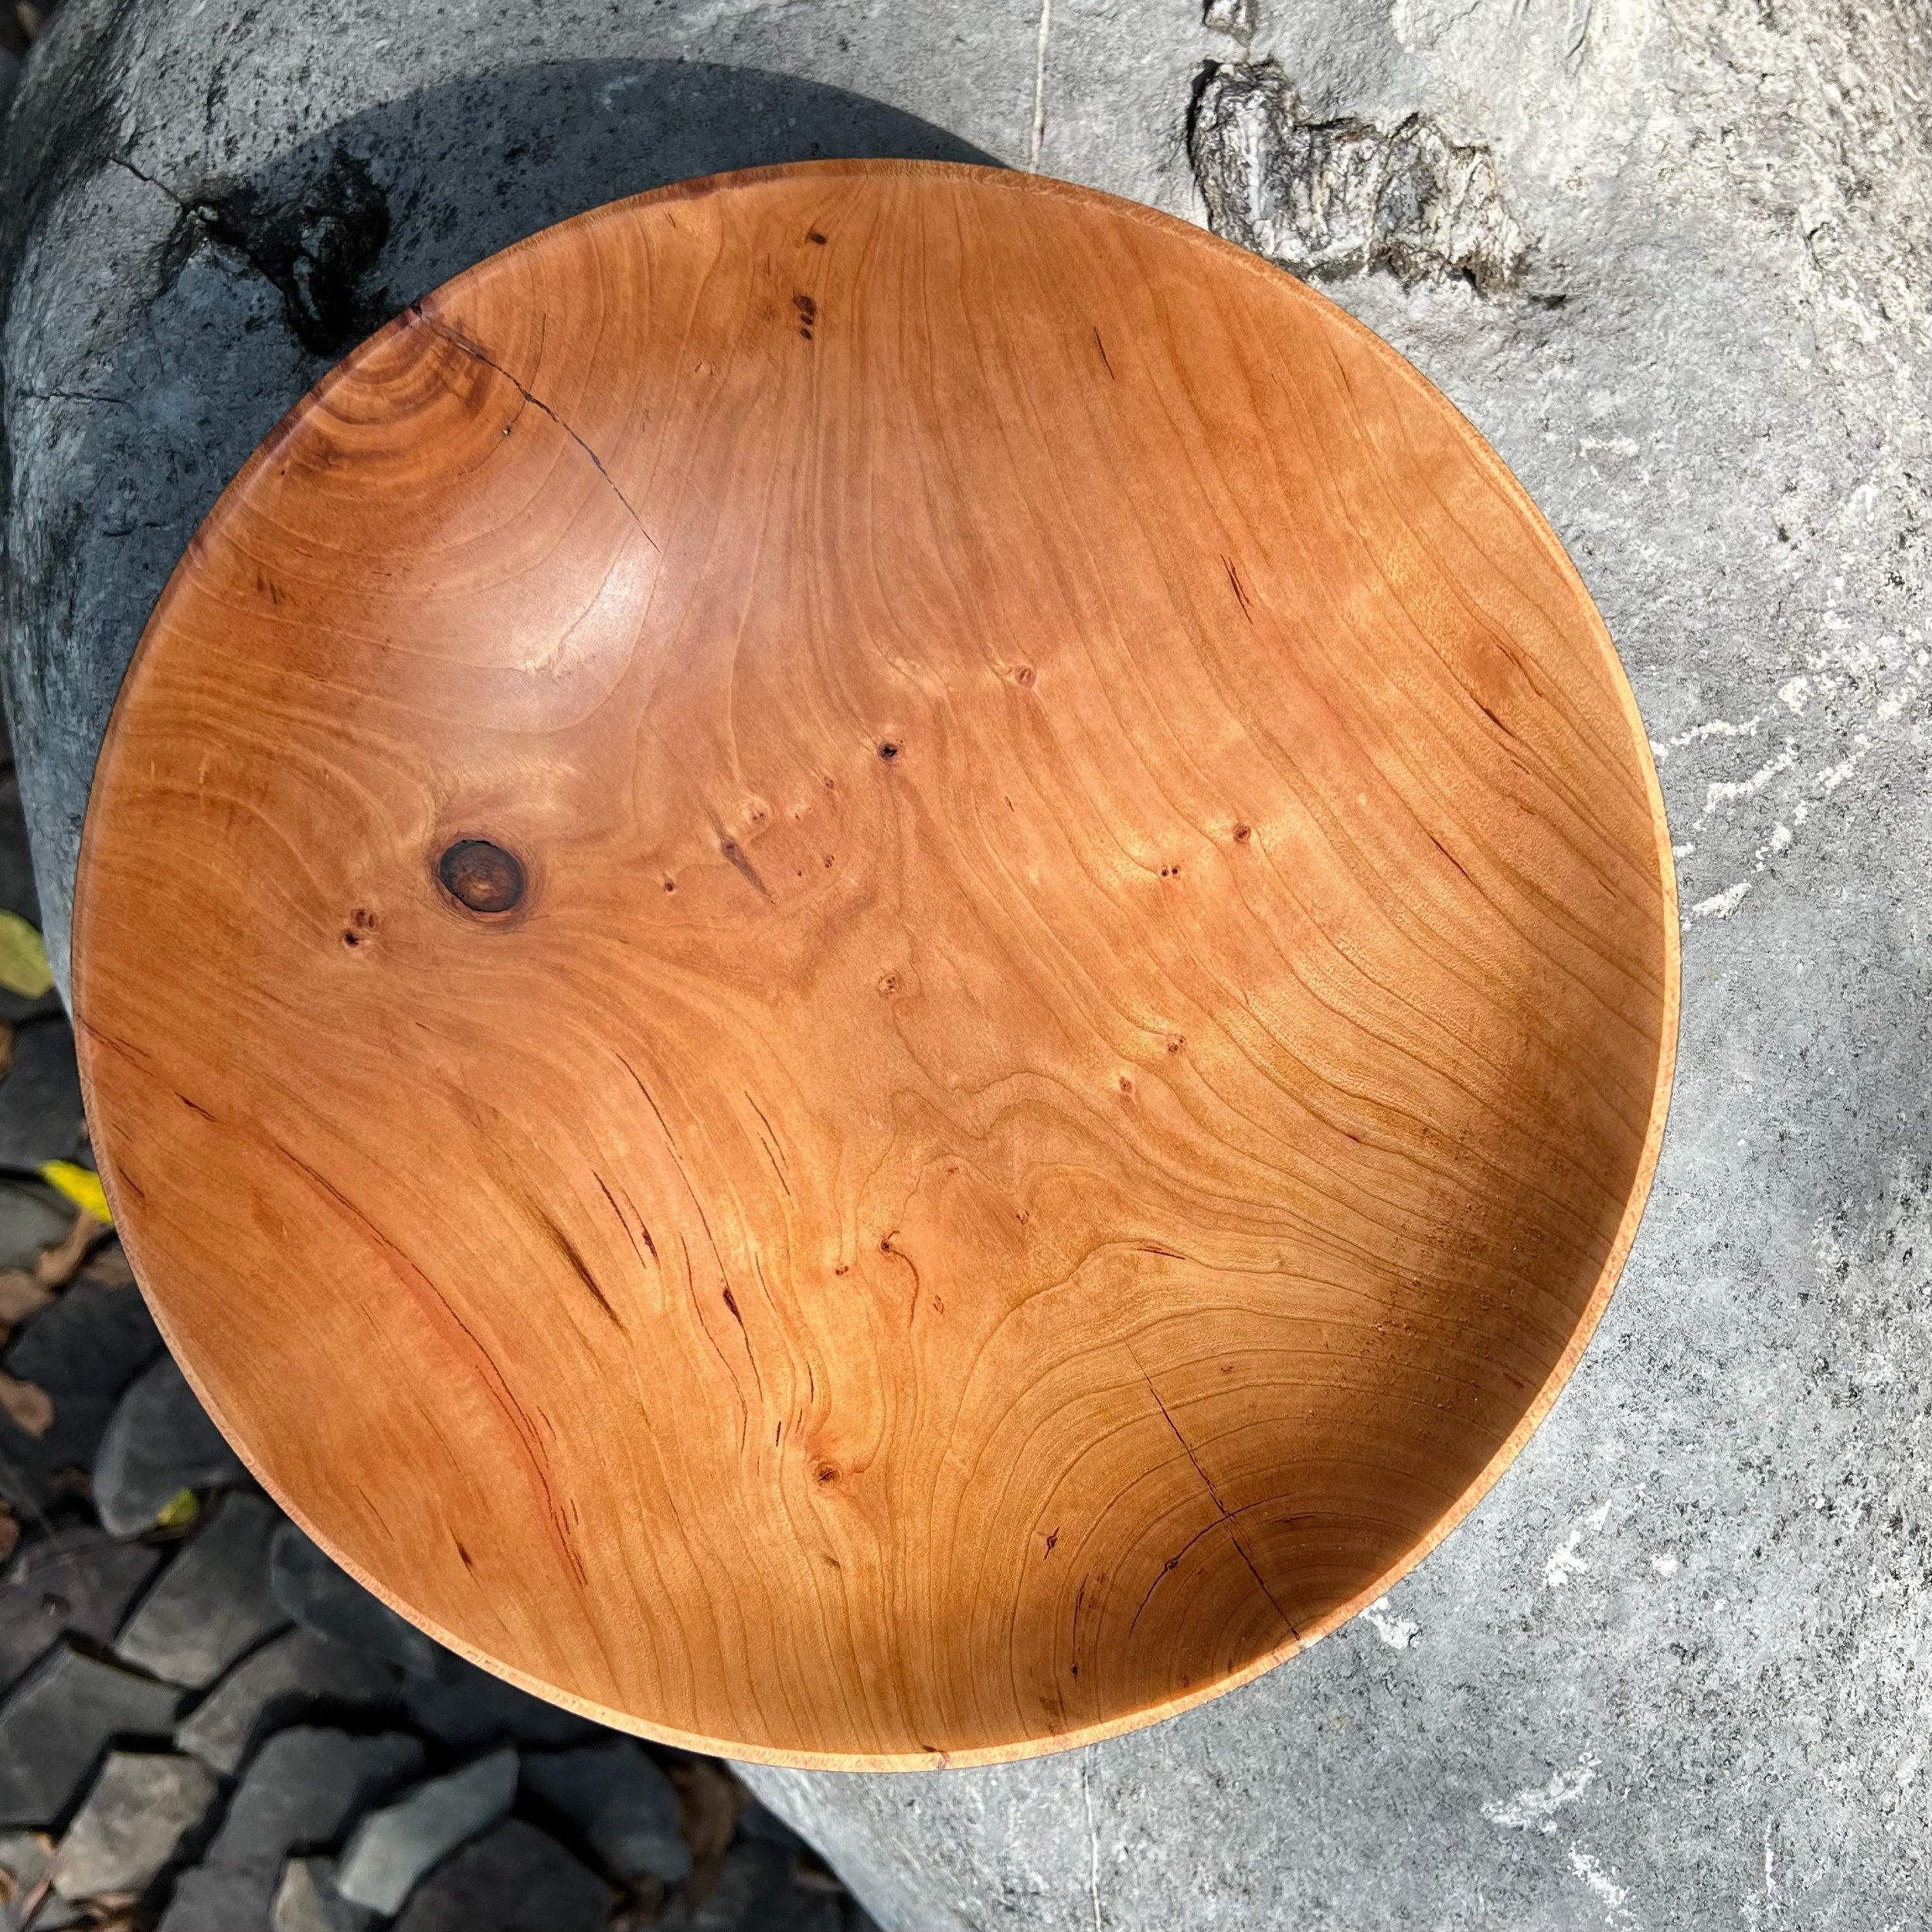  I have a stock of cherry in the US which allows for much large bowls than typically turn in France. This one is 11” in diameter, 2 ½” high to the rim, and 2 ⅛” deep at the center. Despite its heft growing half way down from the rim, the bottom is da